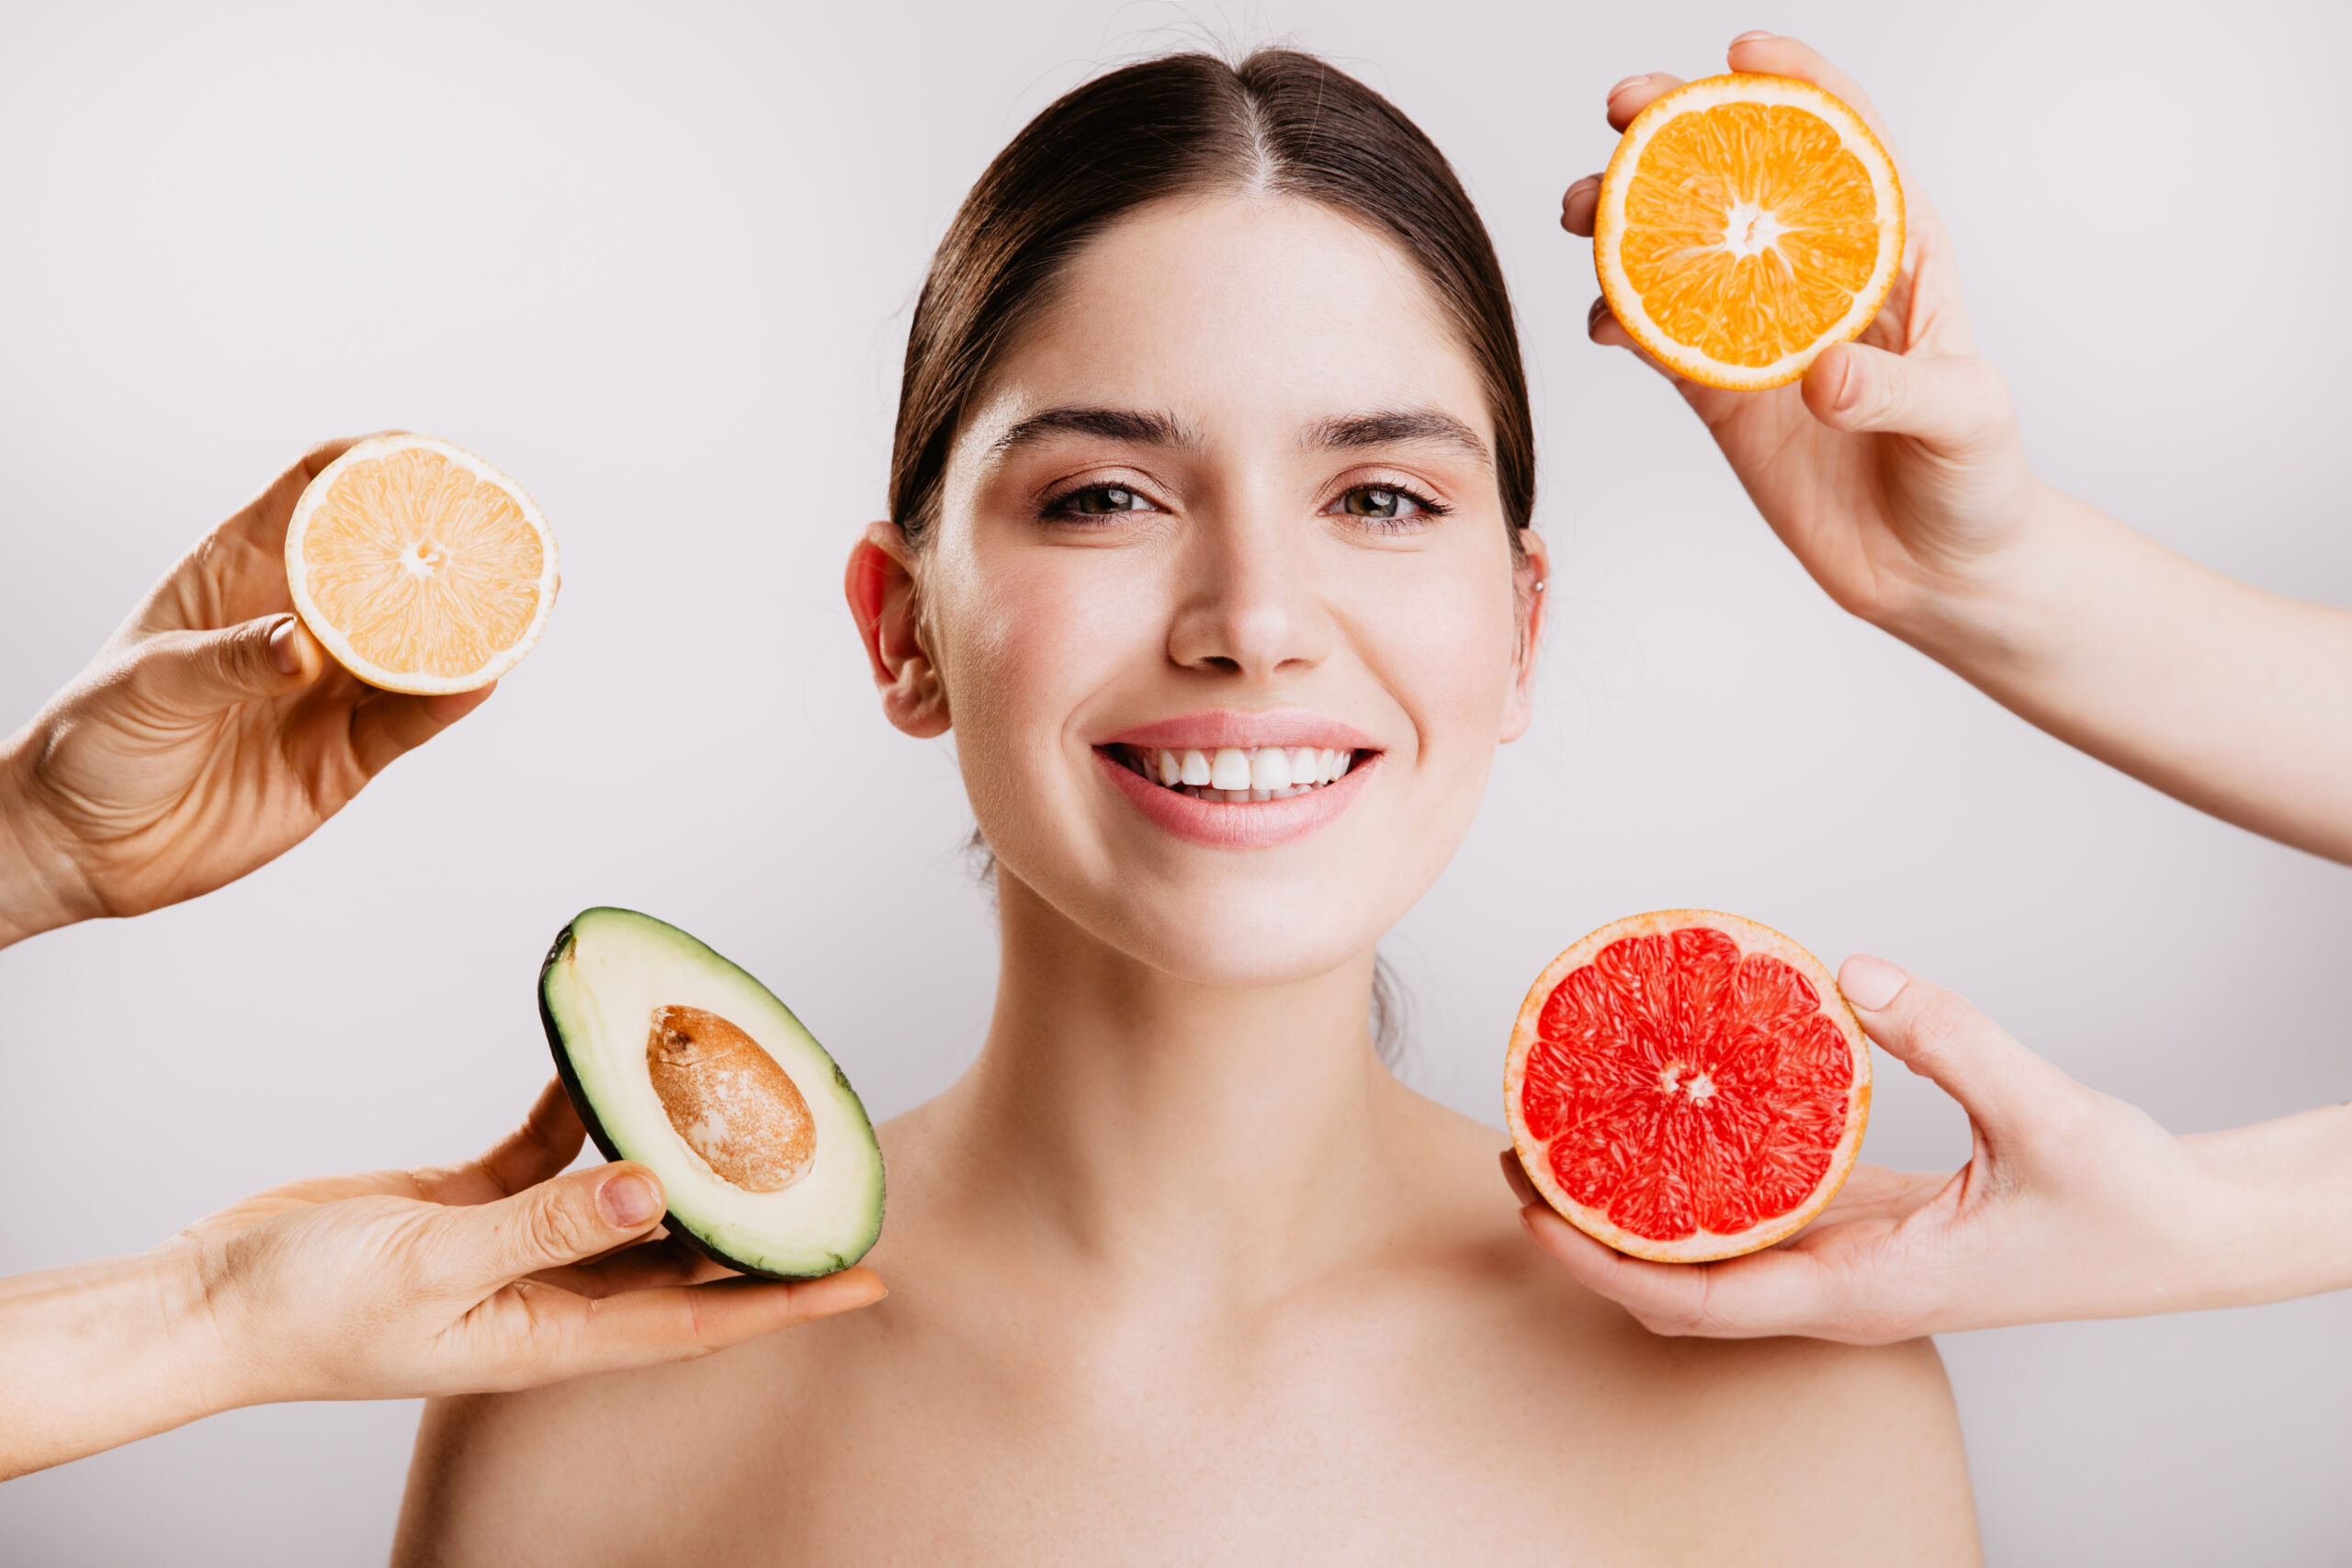 Healthy beautiful radiant skin of woman without makeup. Portrait of girl smiling against background of fruits